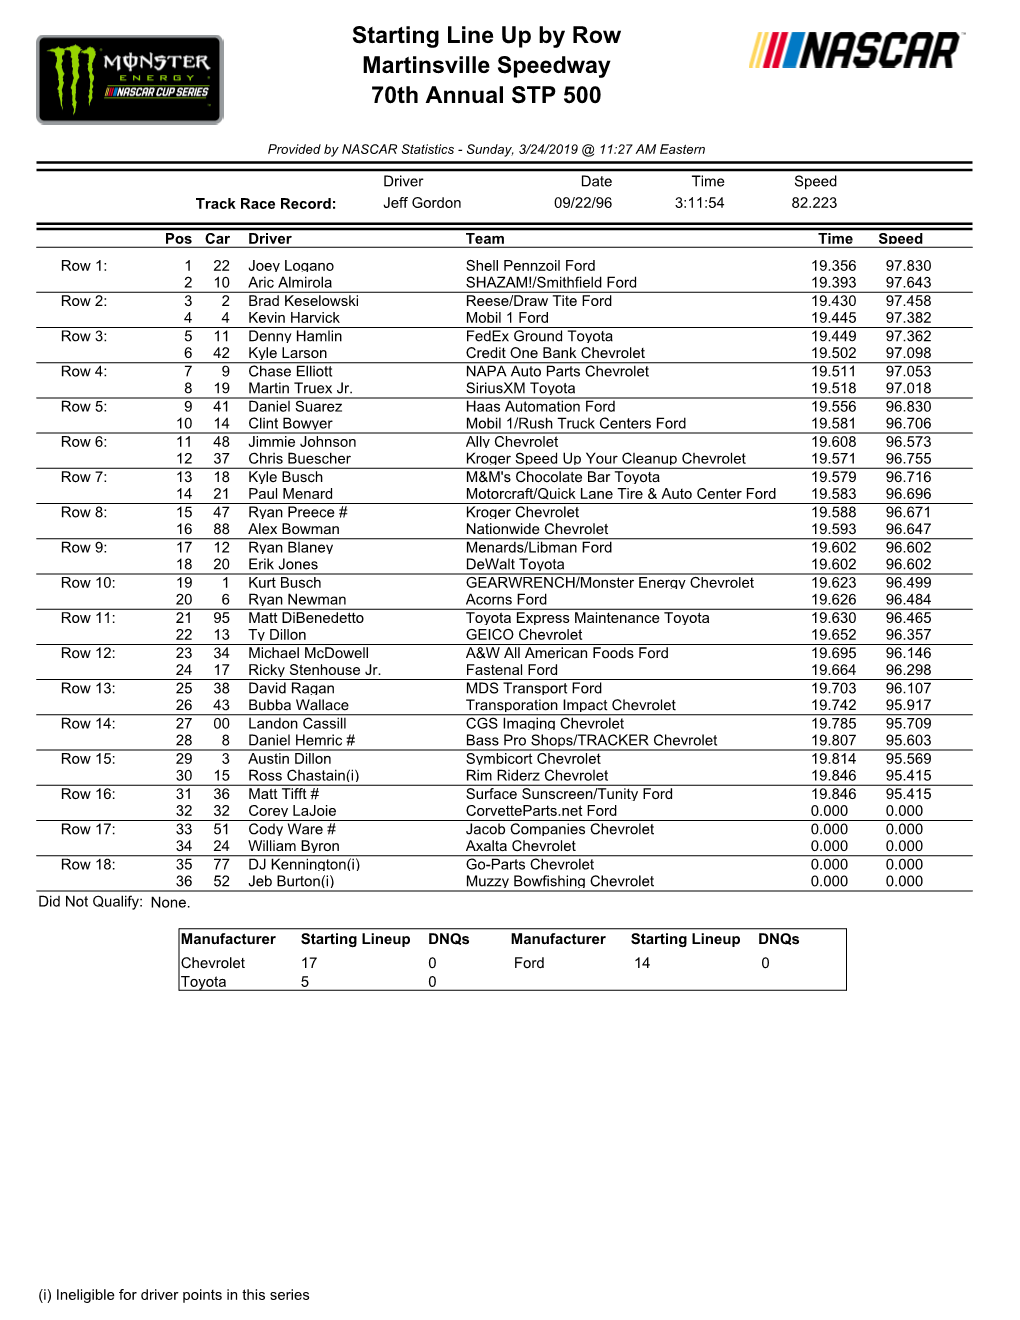 Starting Line up by Row Martinsville Speedway 70Th Annual STP 500